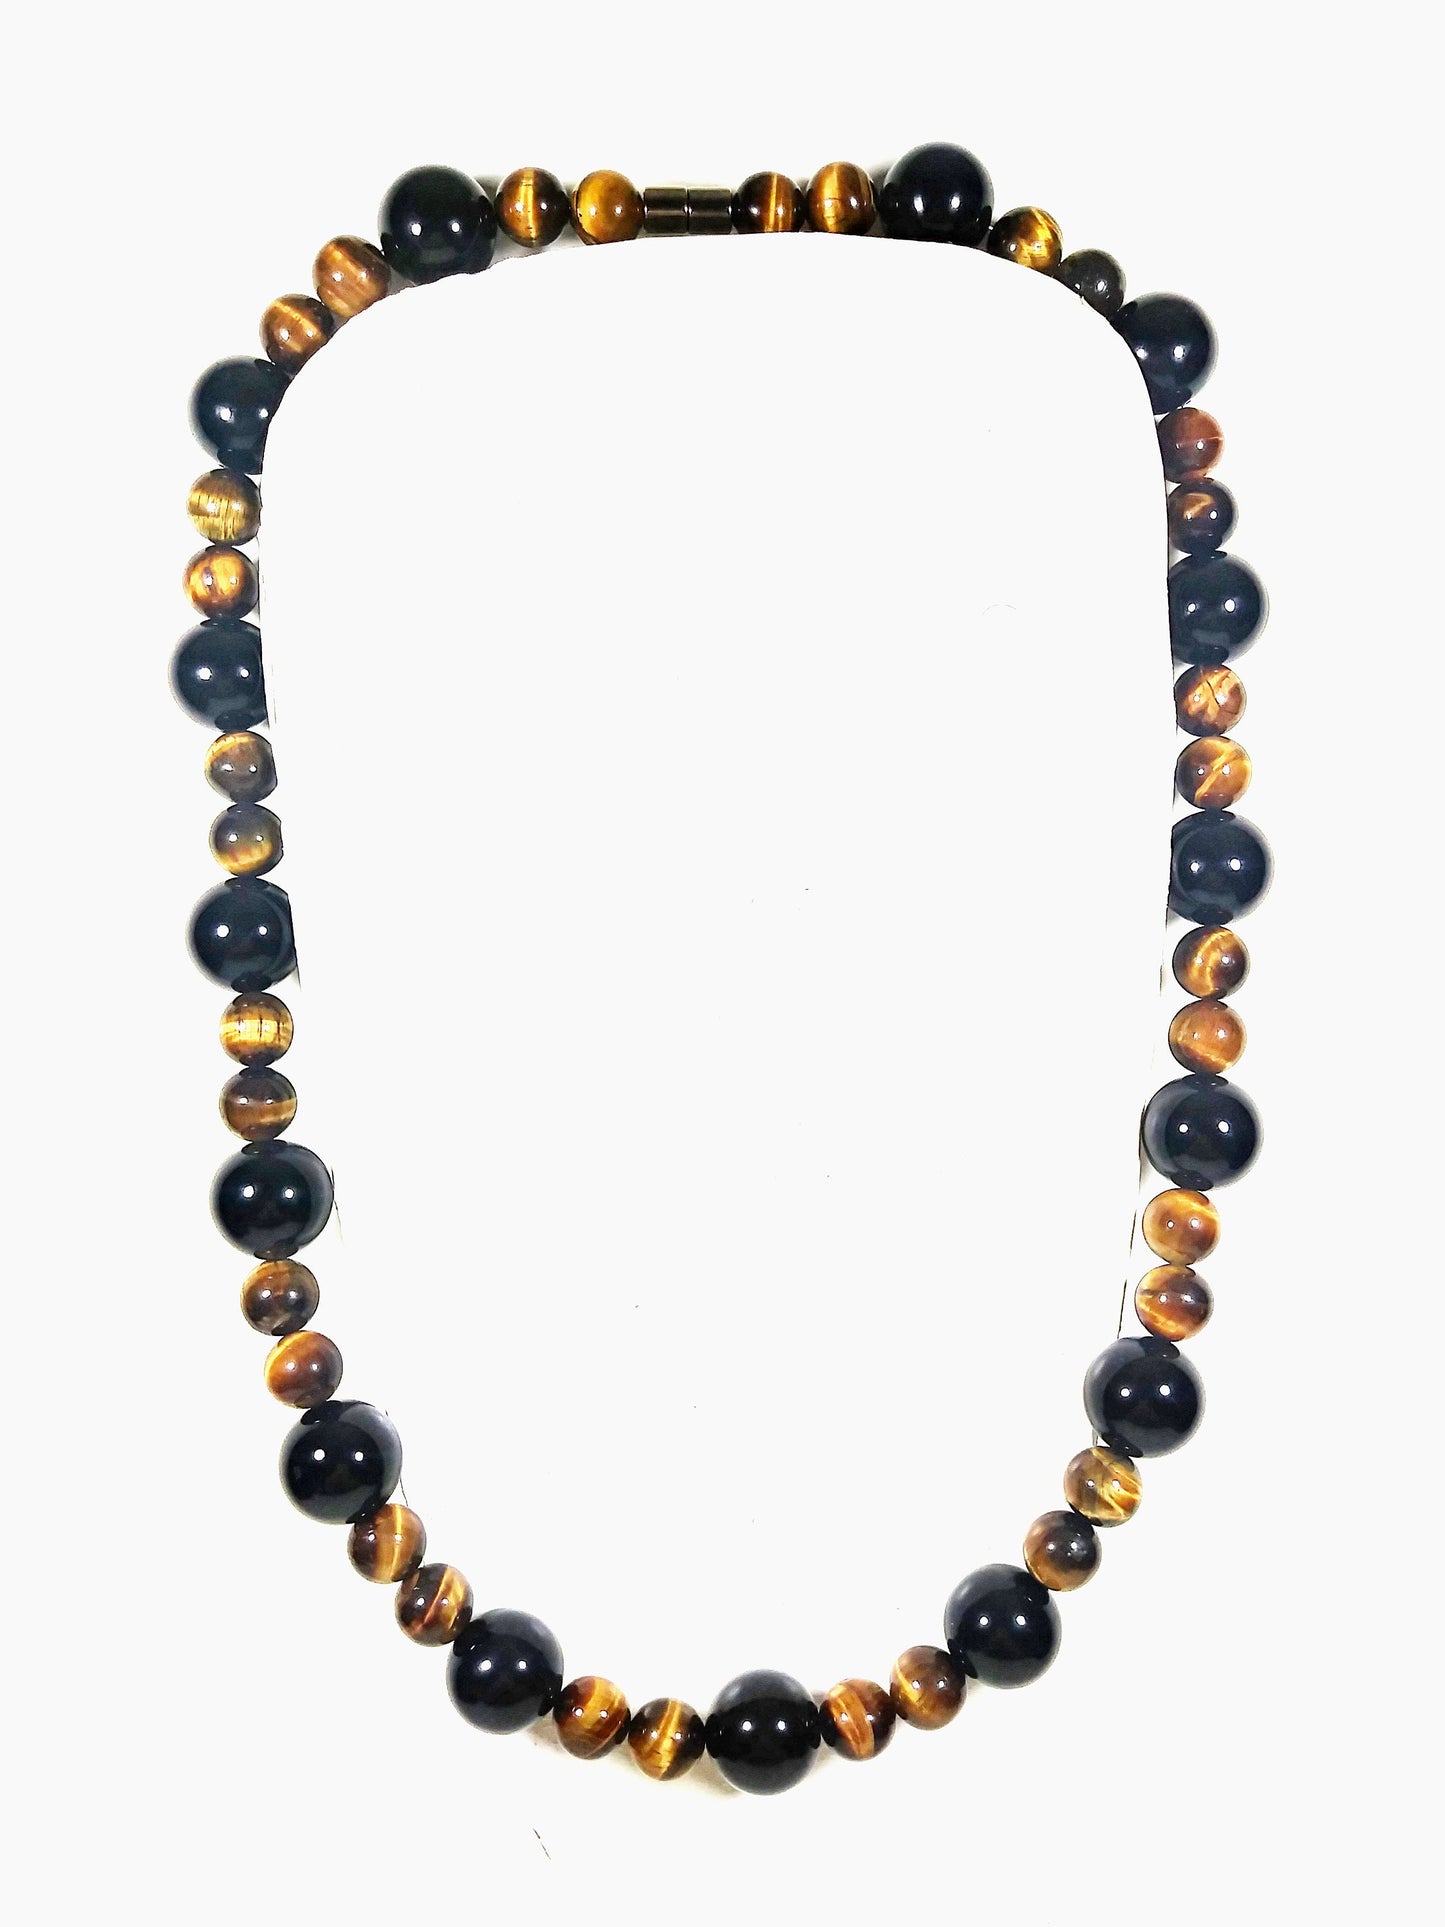 Onyx Tiger Eye Necklace For Men - Protection - Aura Shielding - World's Strongest Magnetic Clasp